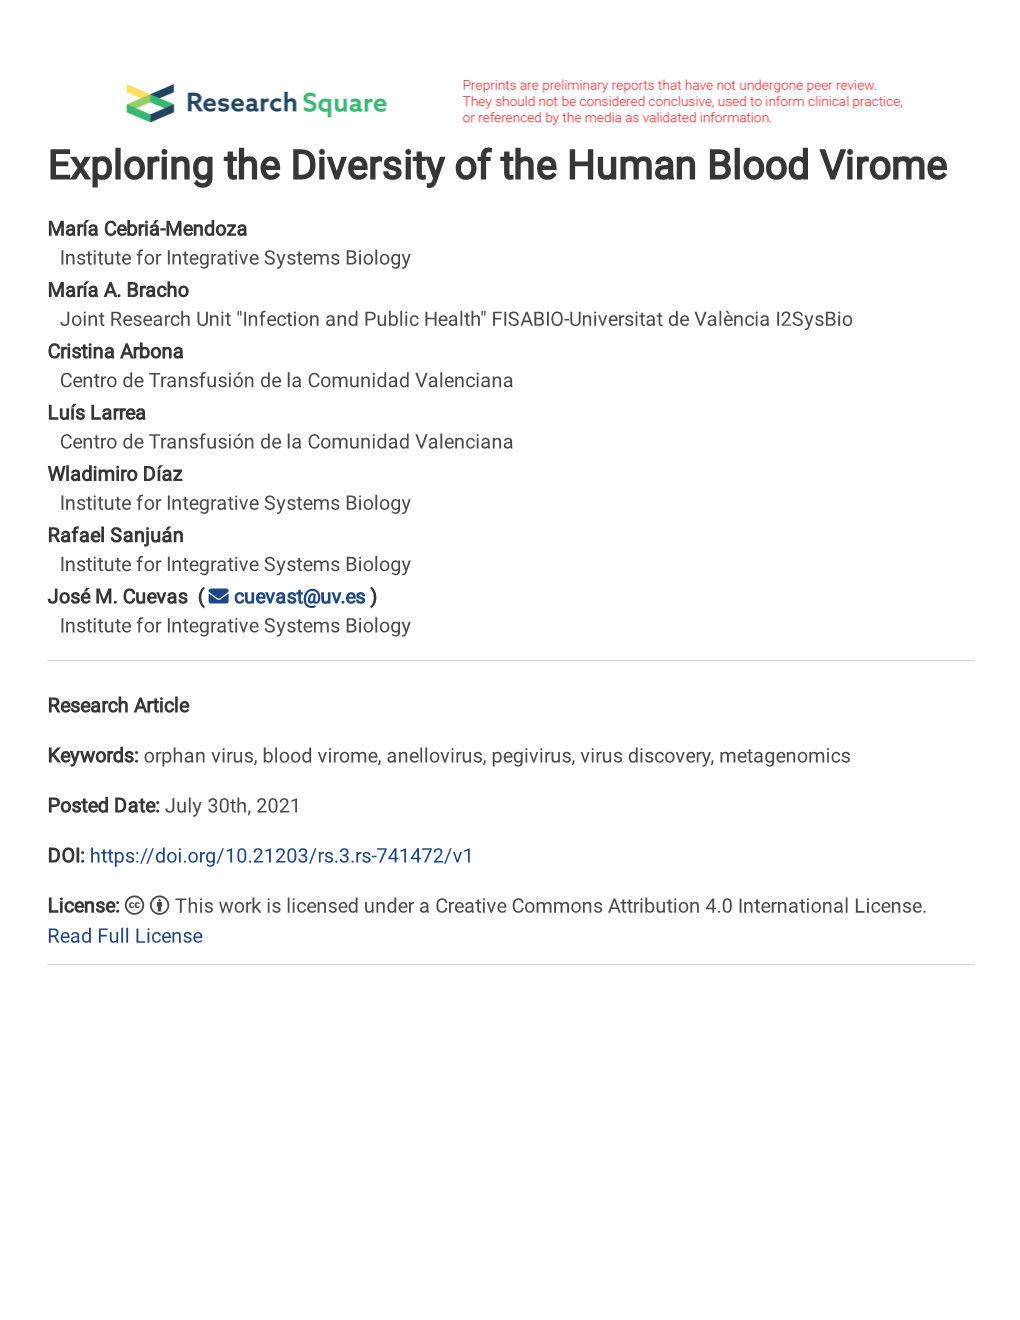 Exploring the Diversity of the Human Blood Virome